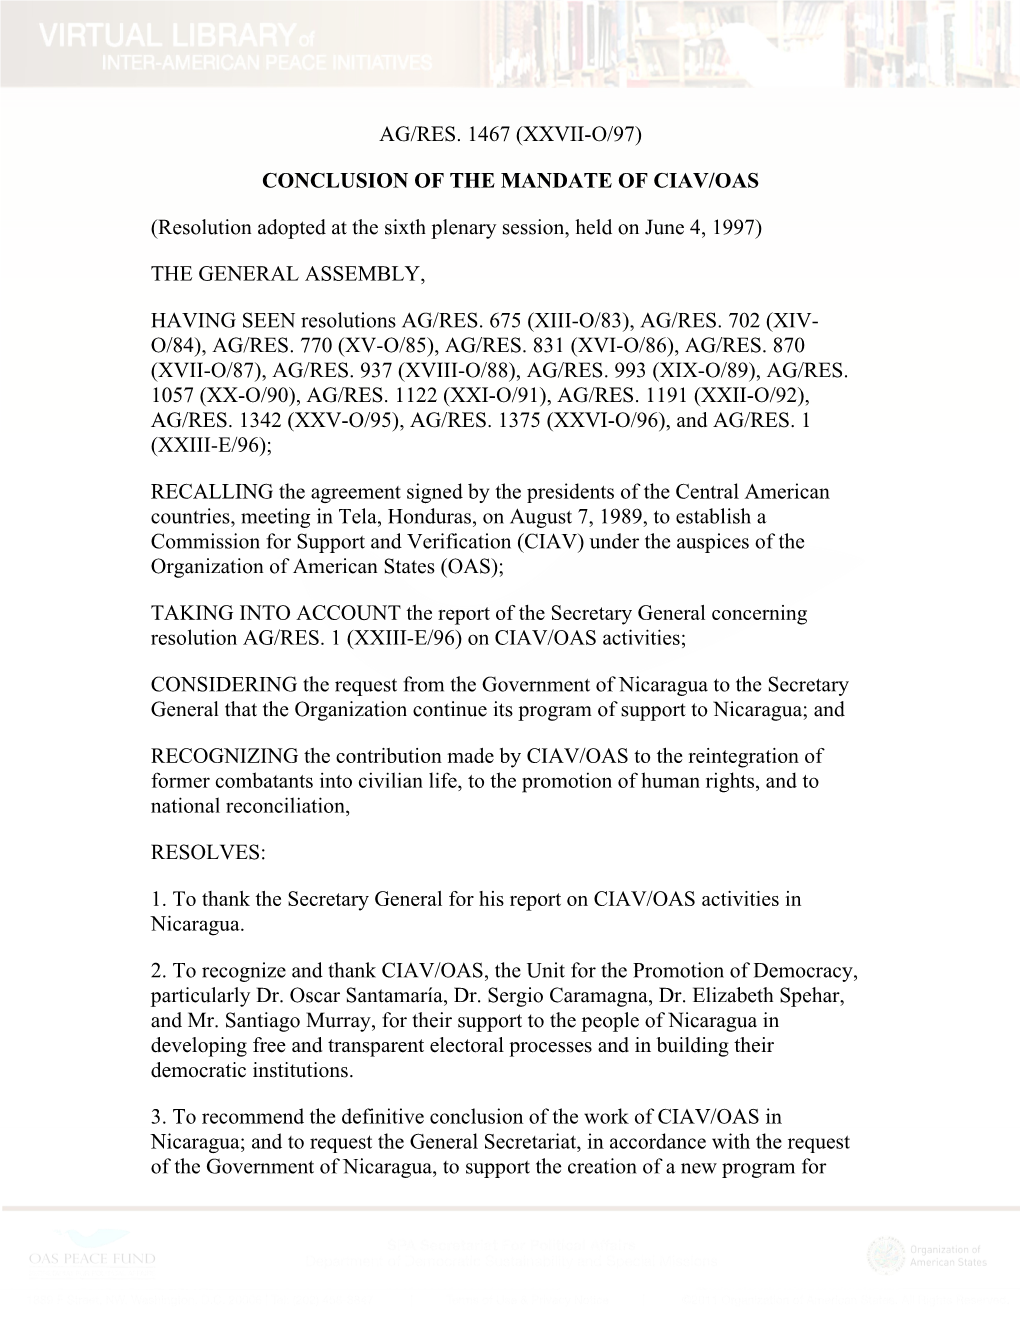 Conclusion of the Mandate of Ciav/Oas